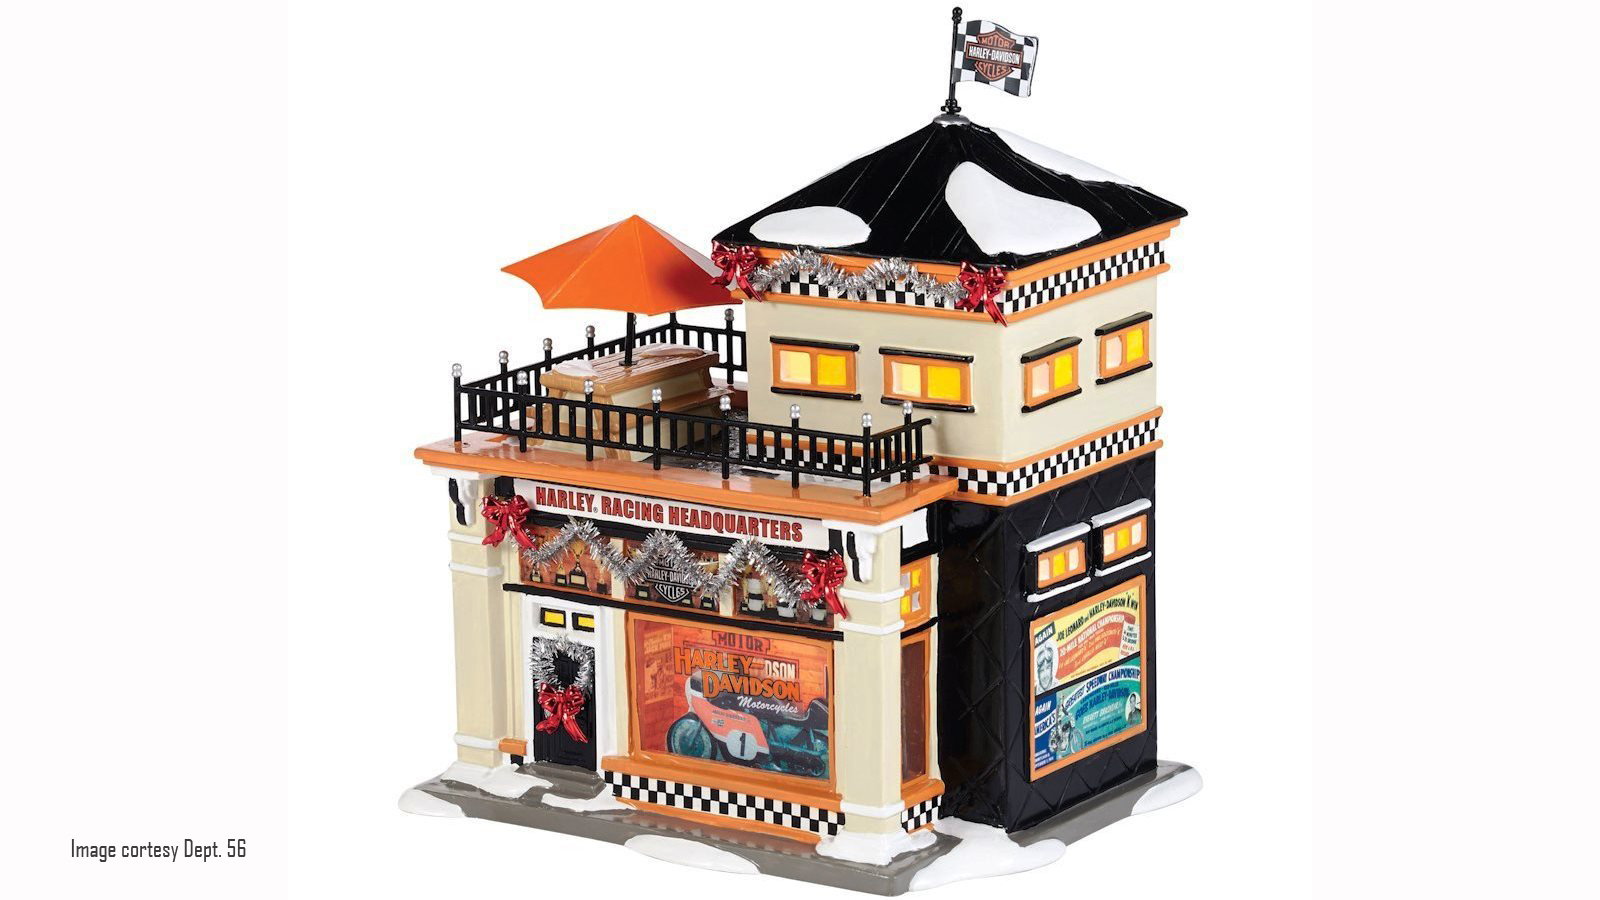 Harley Davidson Miniature Village Motorcycle Clubhouse